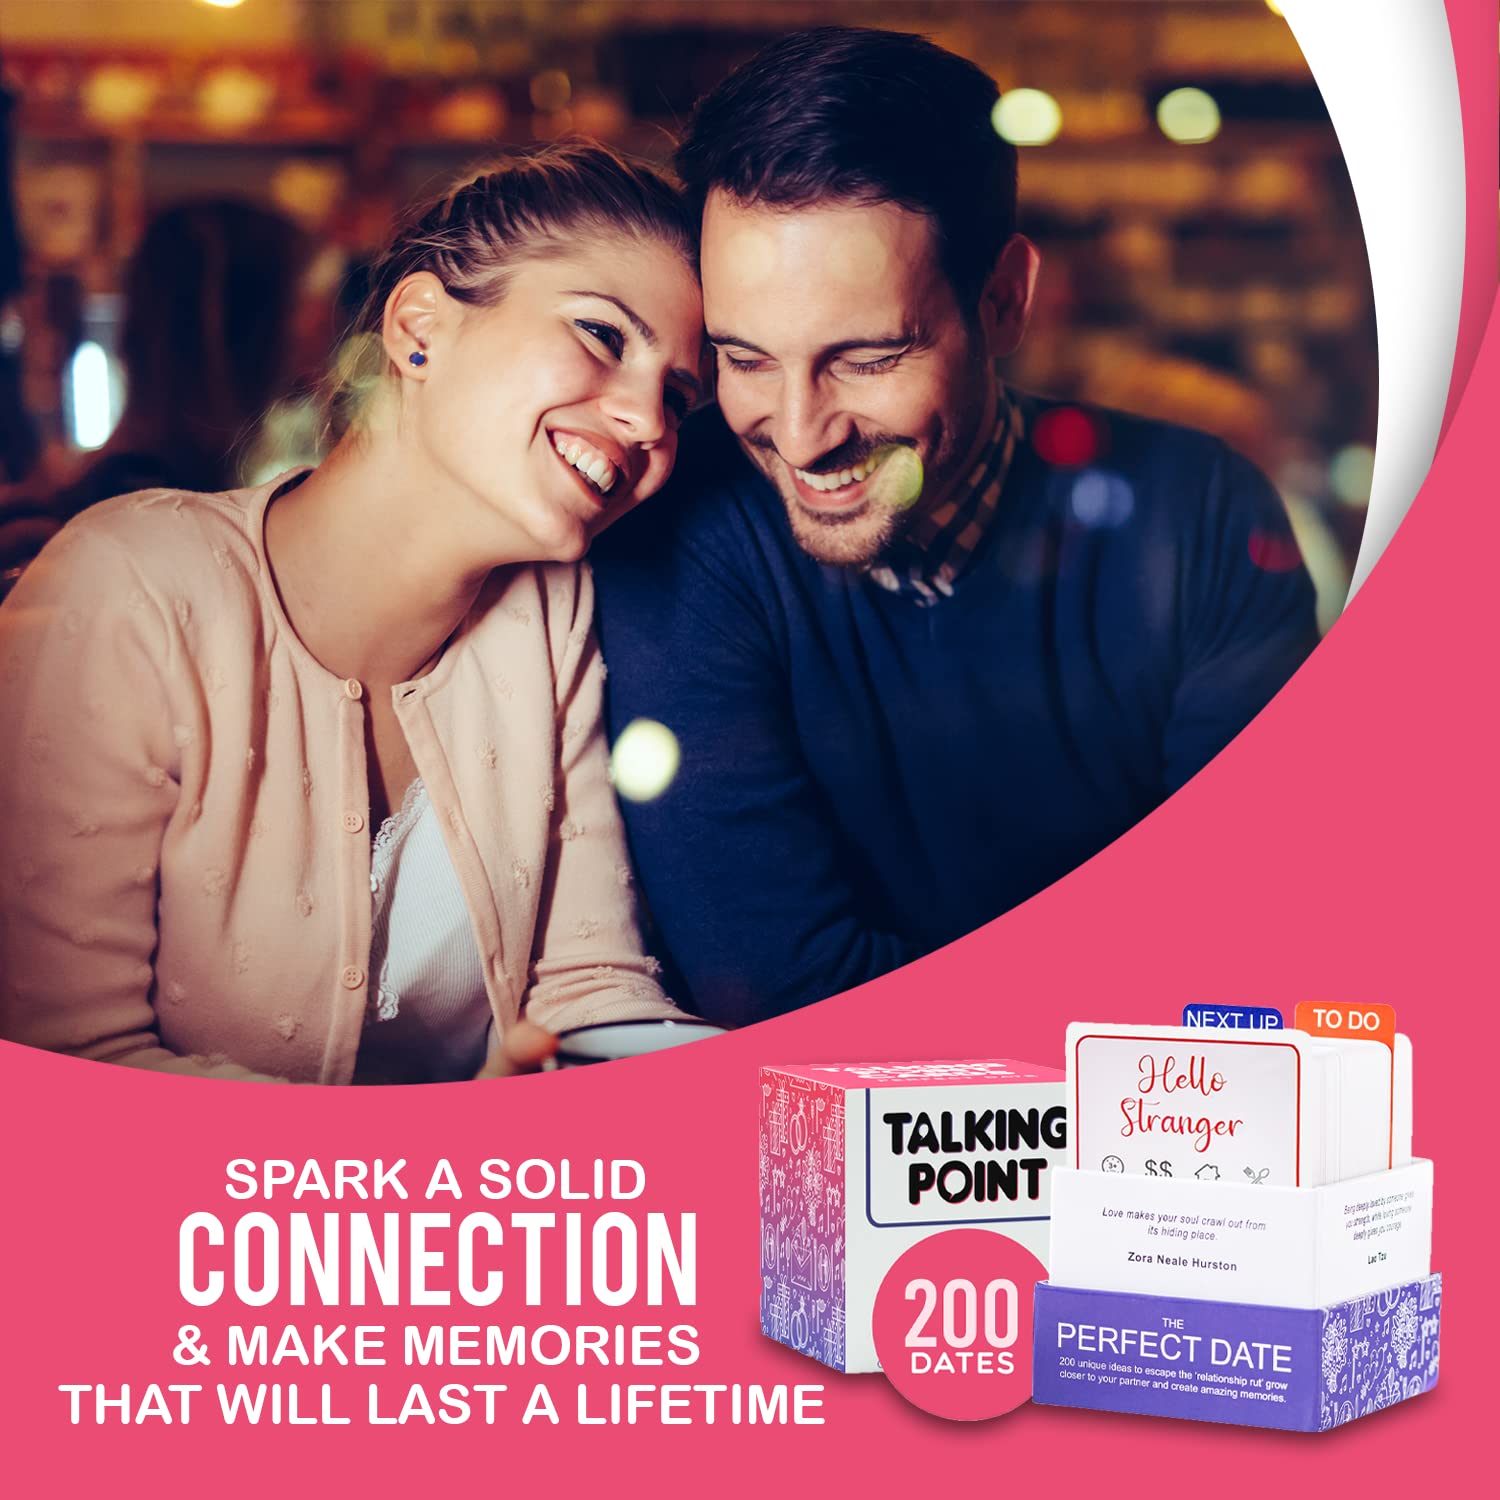 200 Awesome Date Night Ideas - Have Fun and Build Connection with Question Cards, Couples Games and Romantic Adventures - Dating or Married Couples Date Night Kit - Couples Card Games for Adults